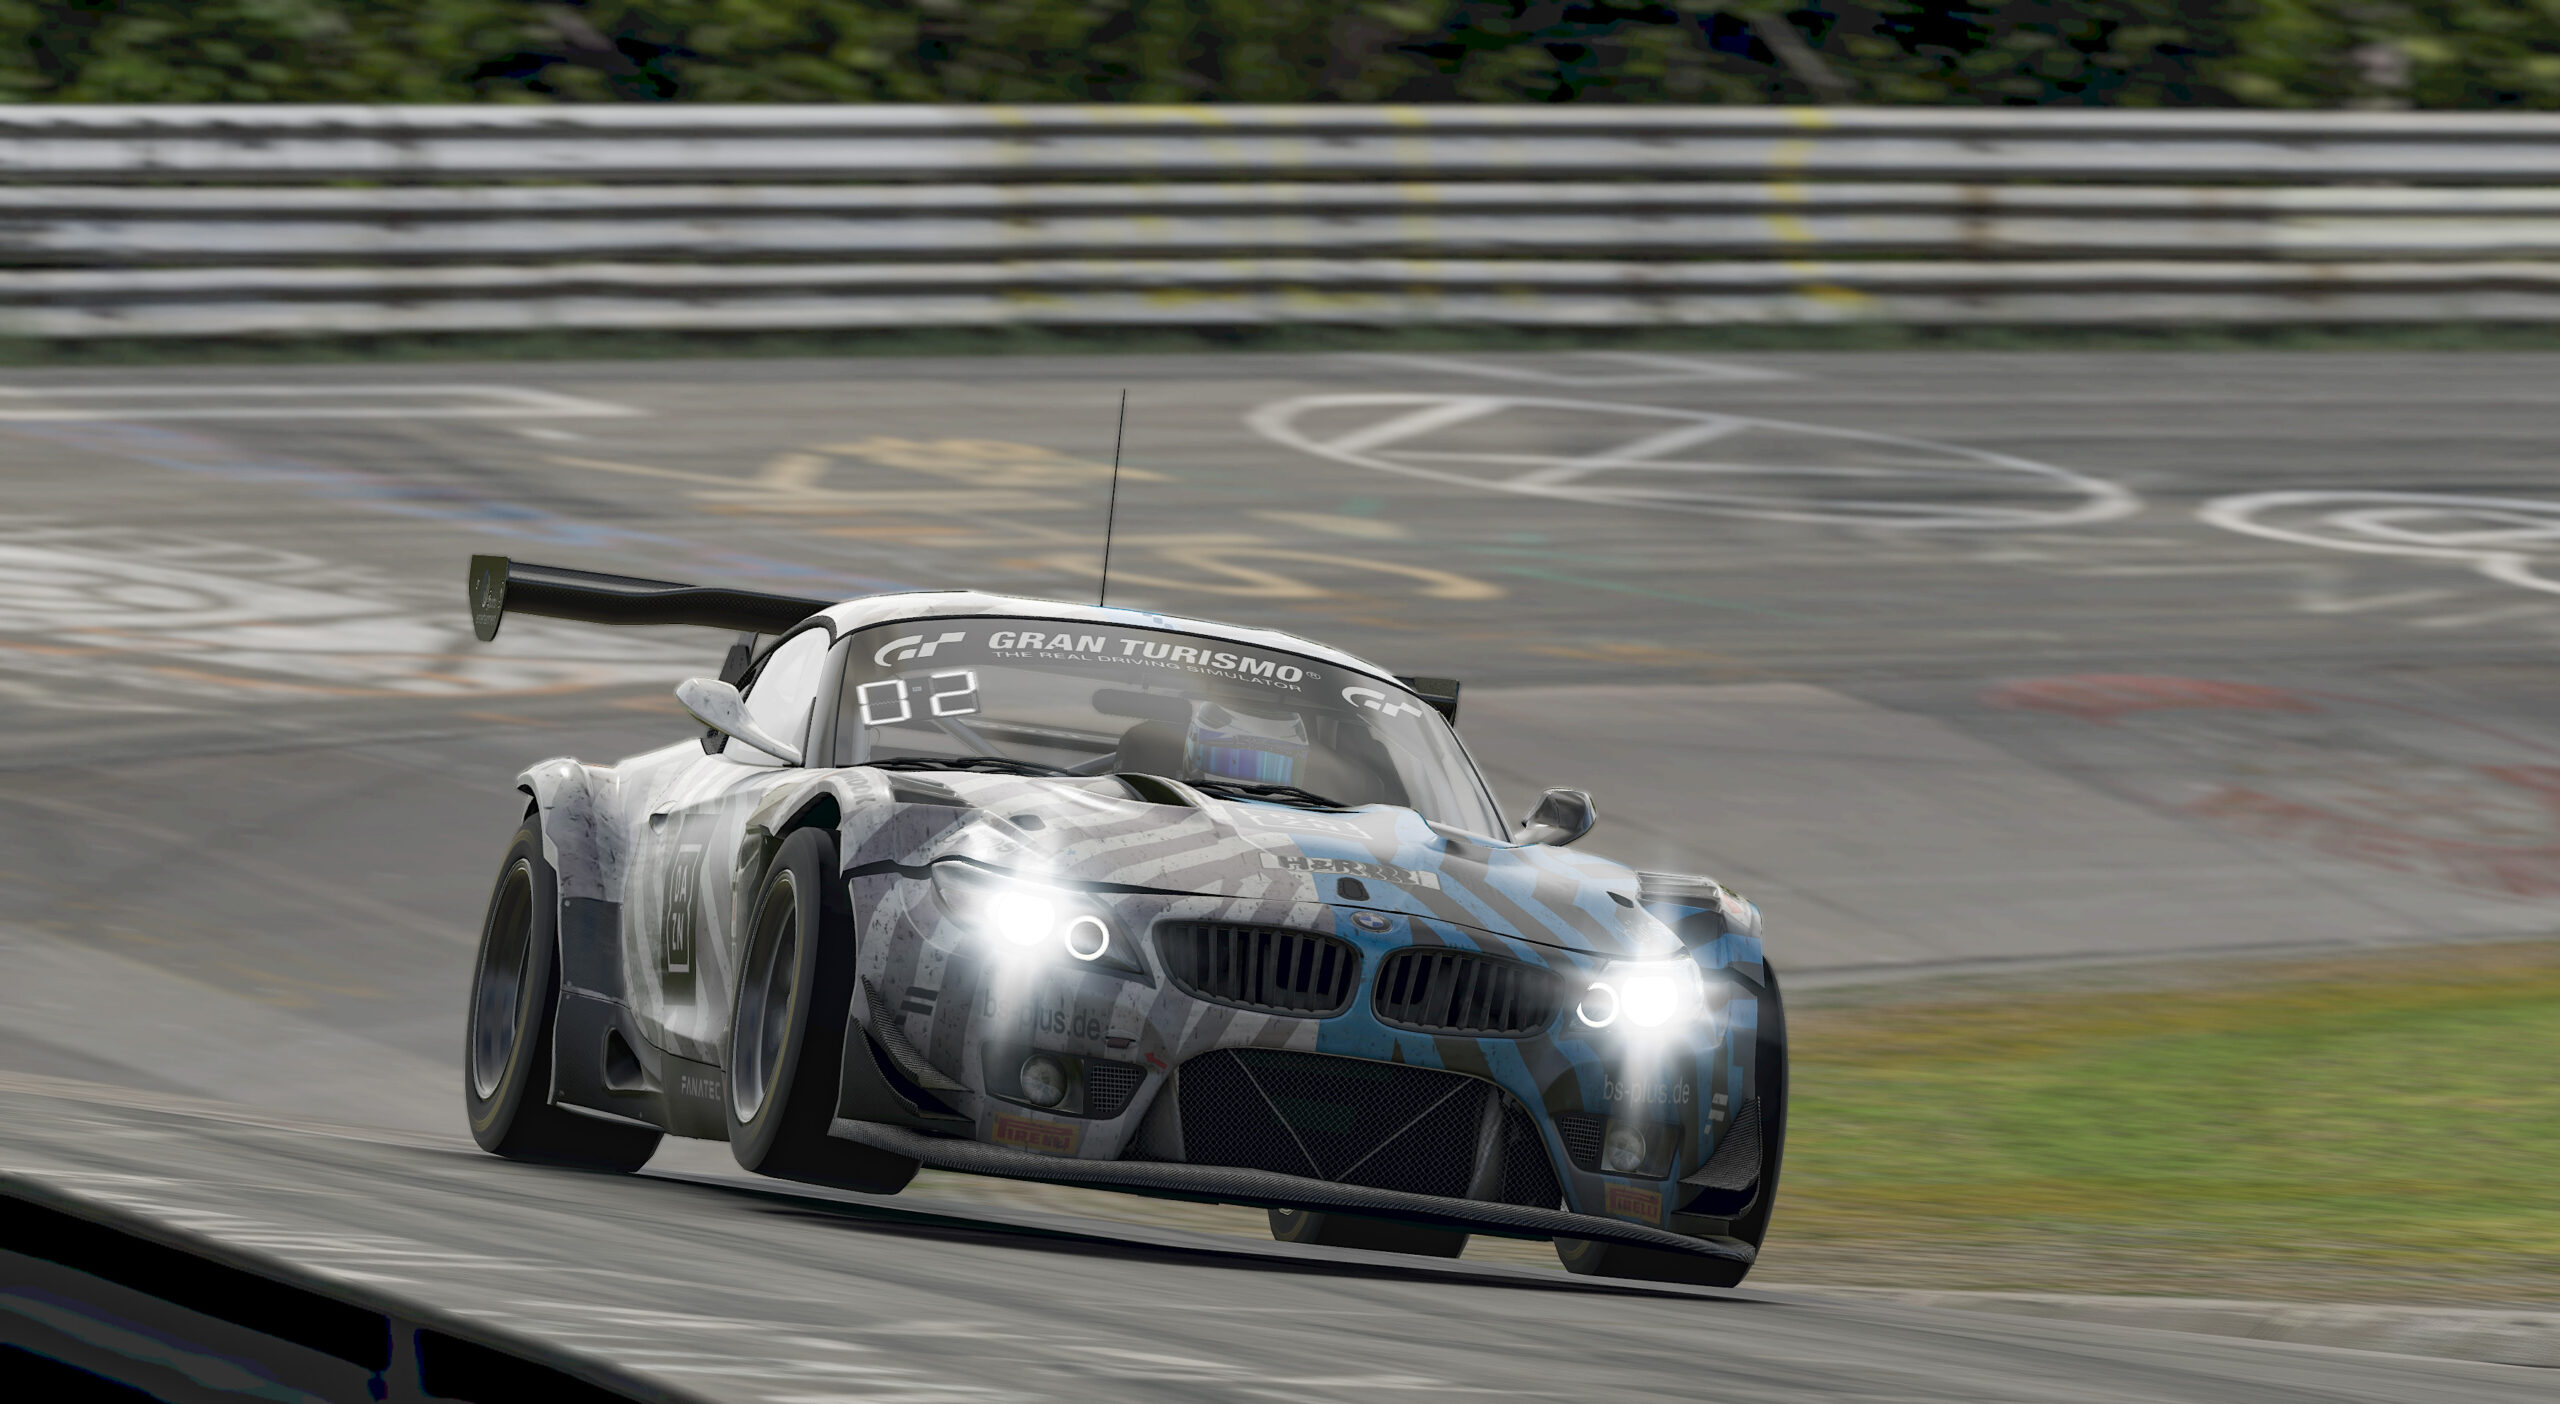 Philipp Eng finishes 2nd overall in Digital Nurburgring Endurance Series